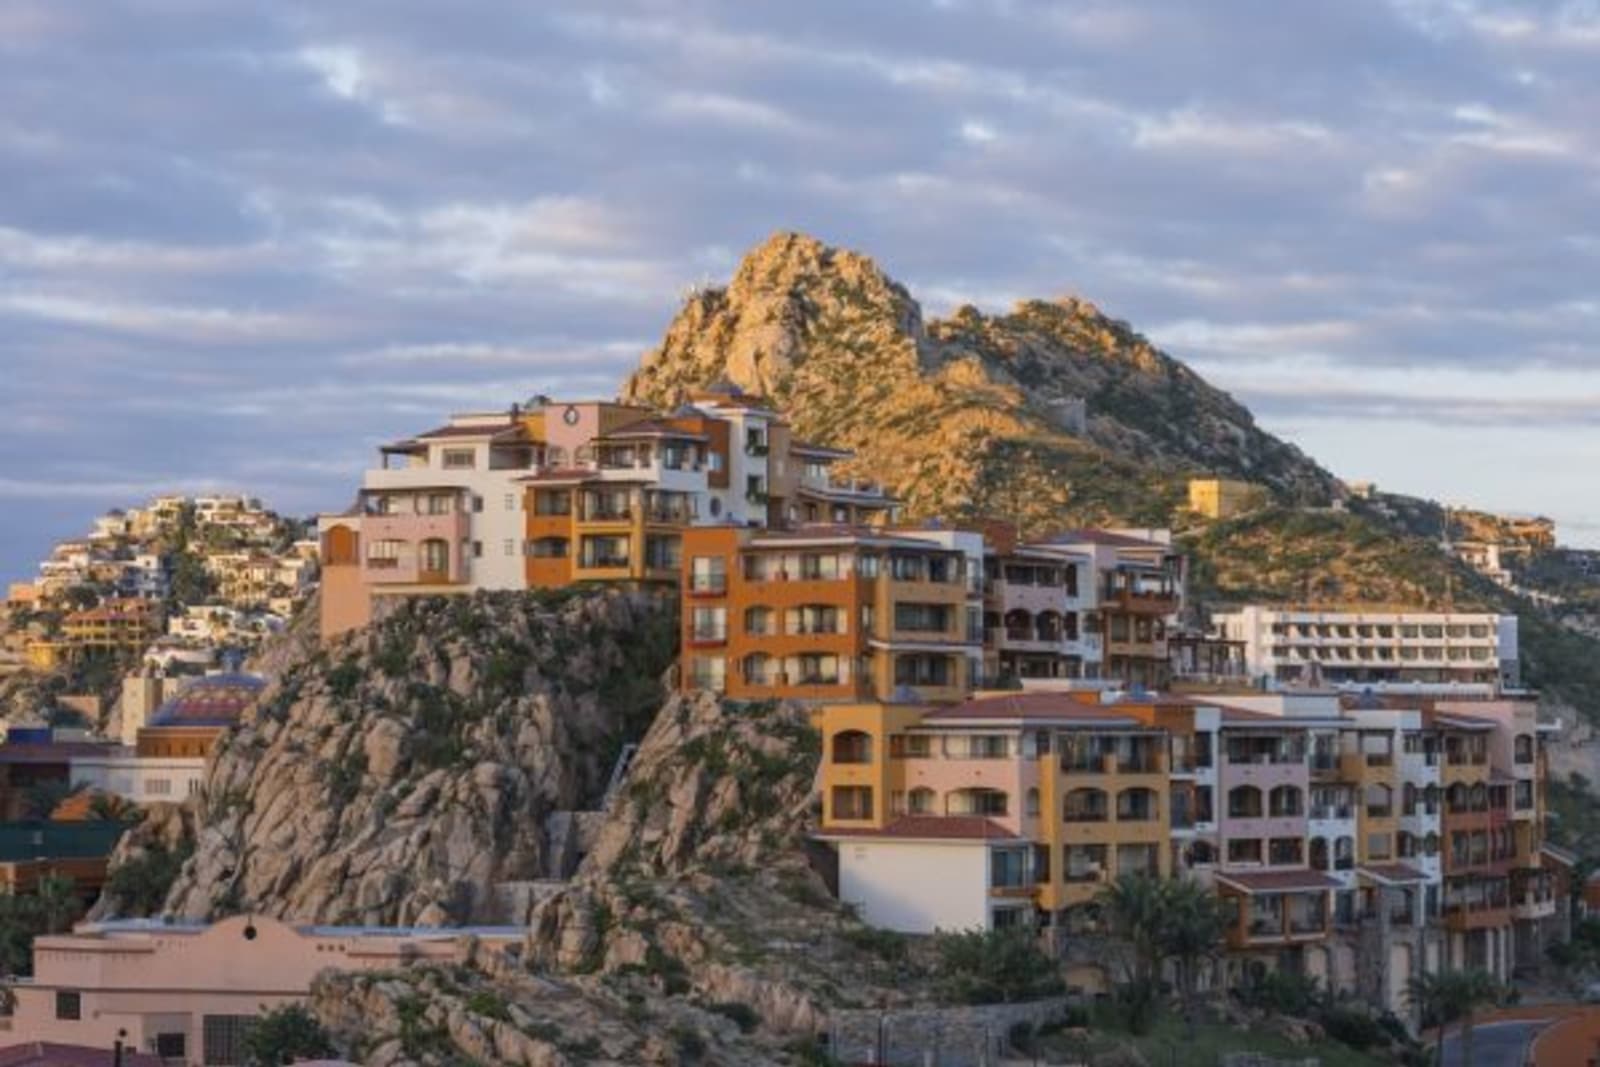 Hilltop houses with sunsetting in Los Cabos